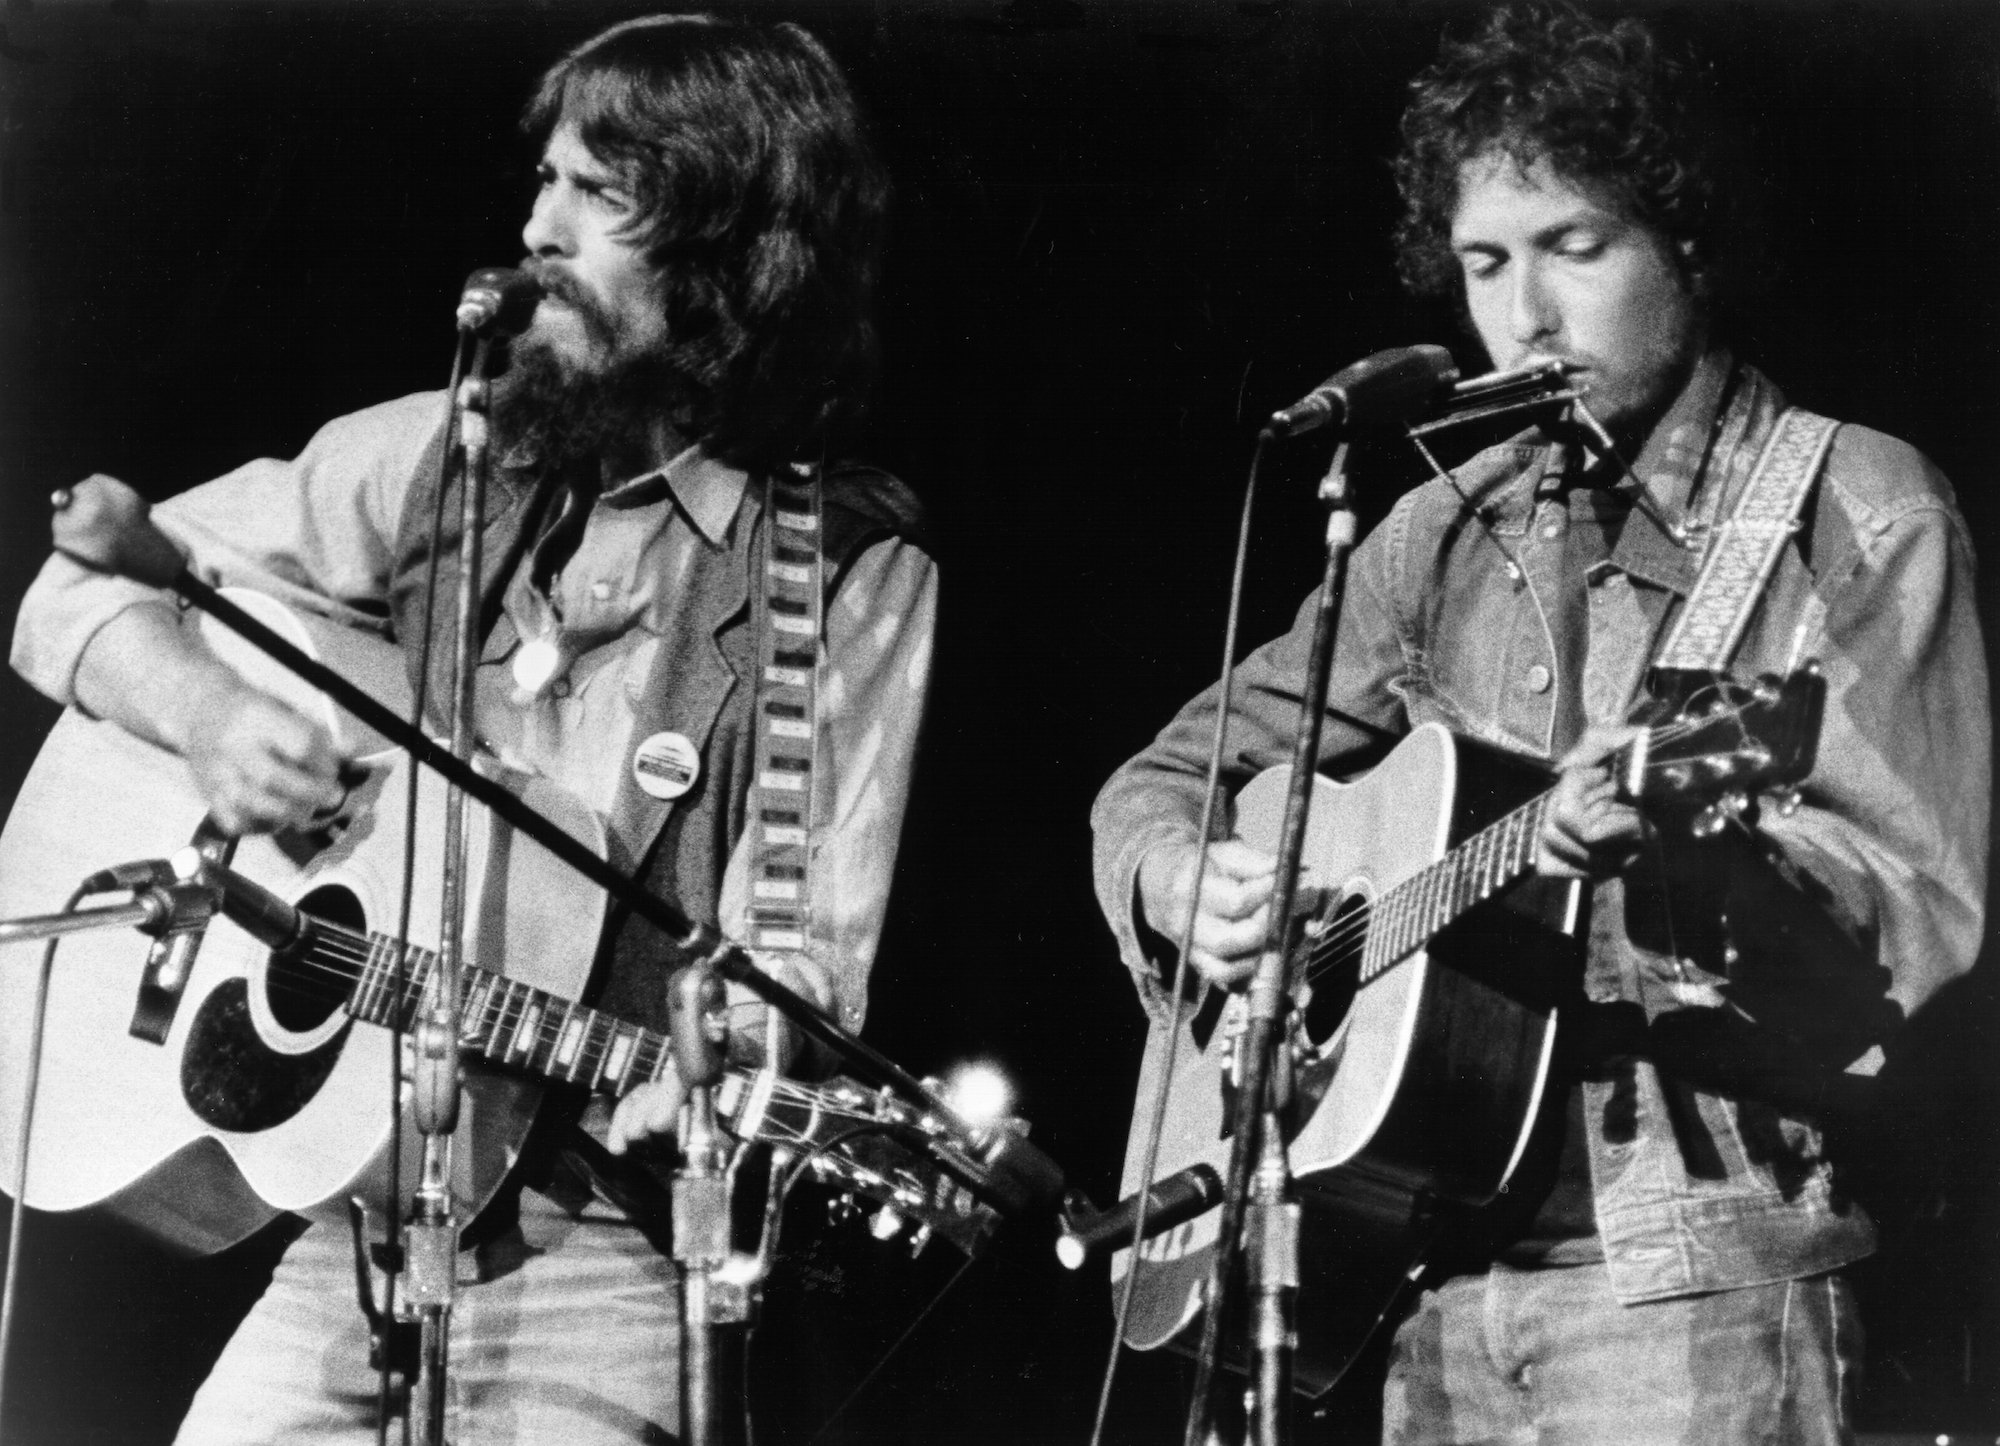 George Harrison and Bob Dylan perform at 'The Concert for Bangladesh' at Madison Square Garden in New York City